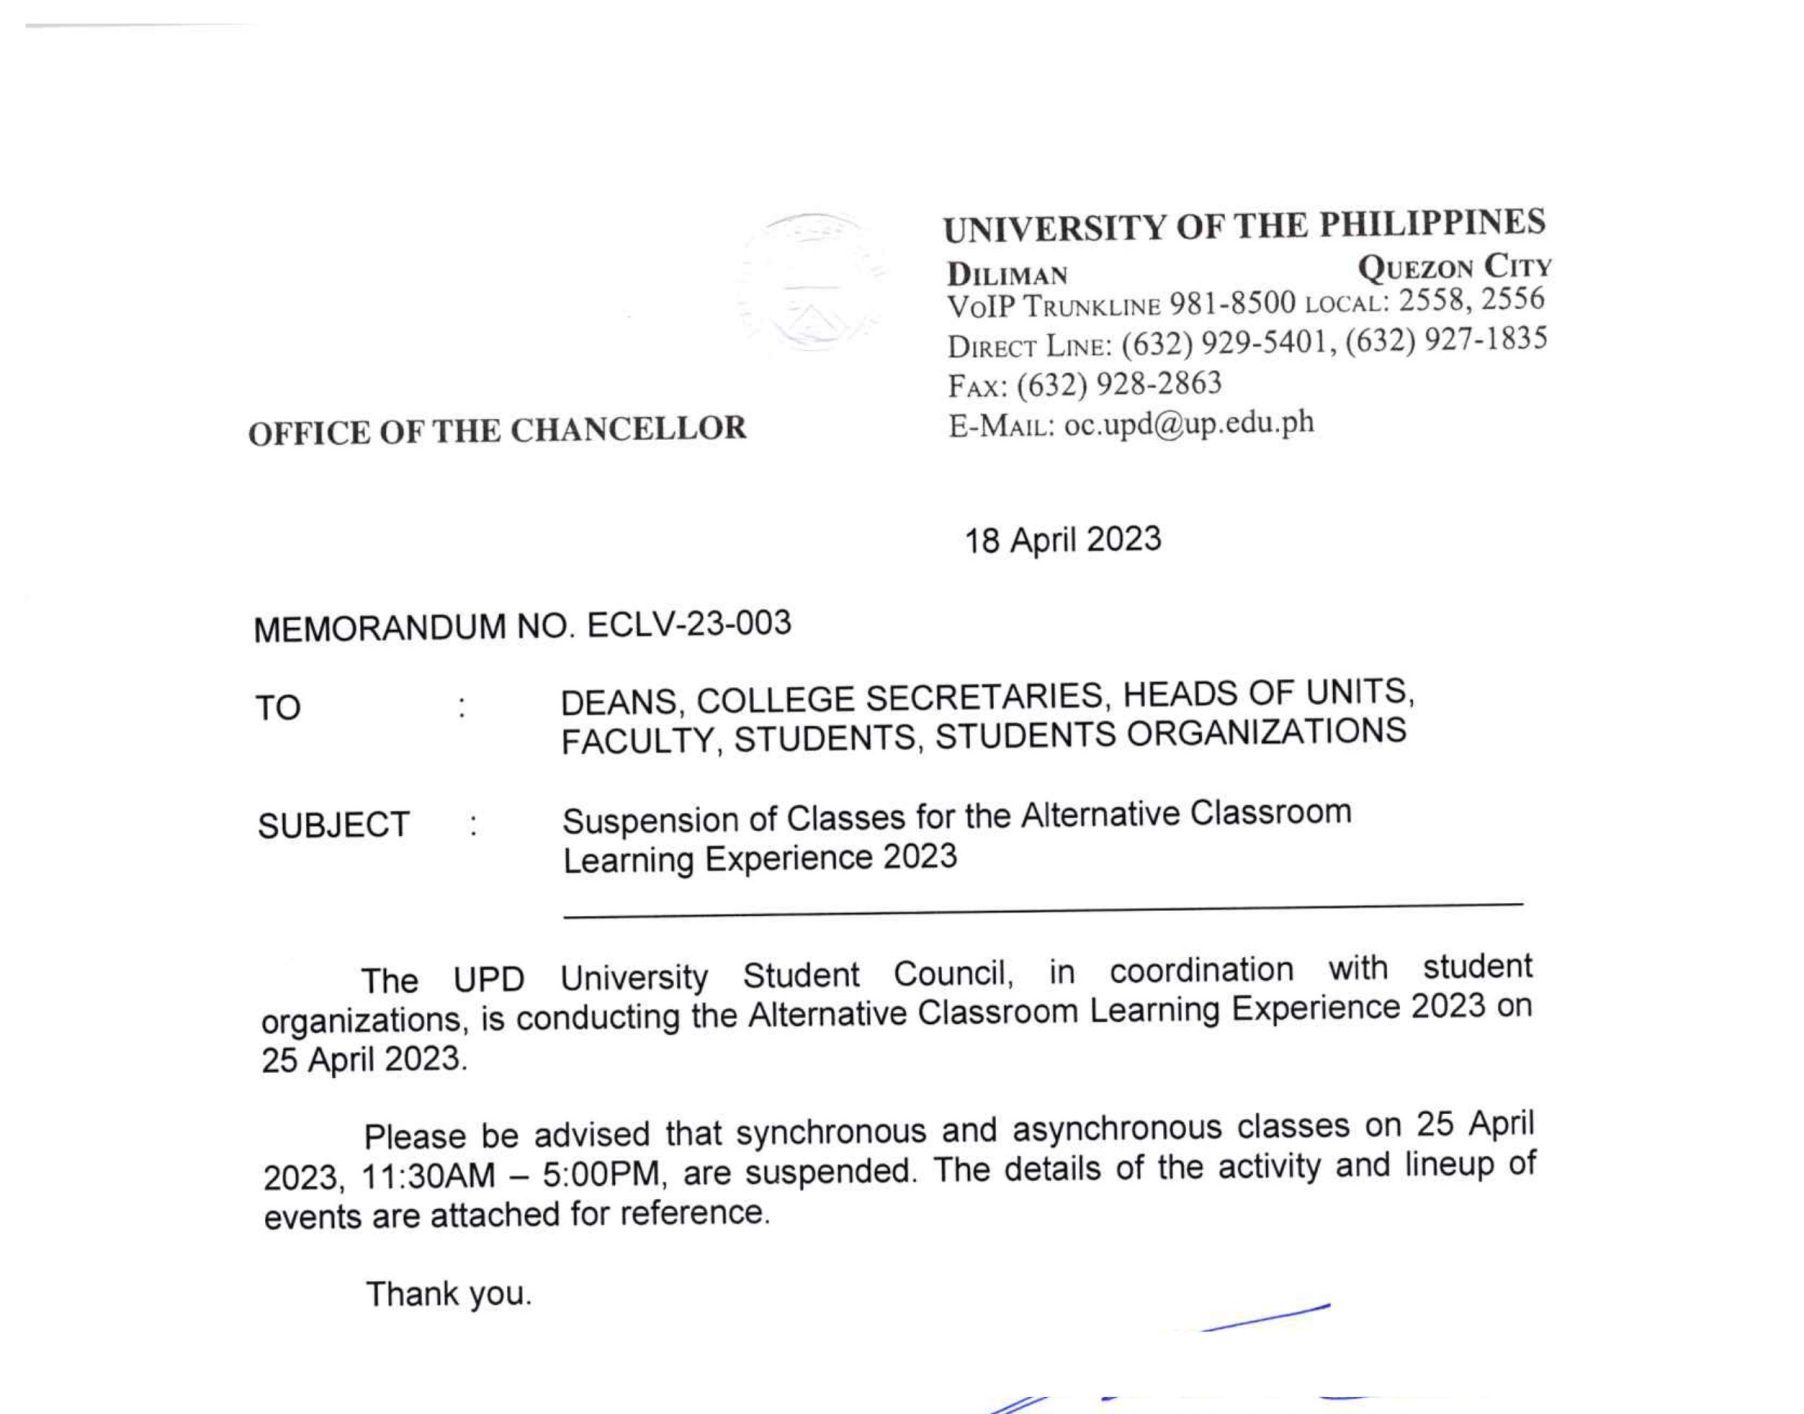 UP Diliman Advisory on Suspension of Work and Classes (23 August